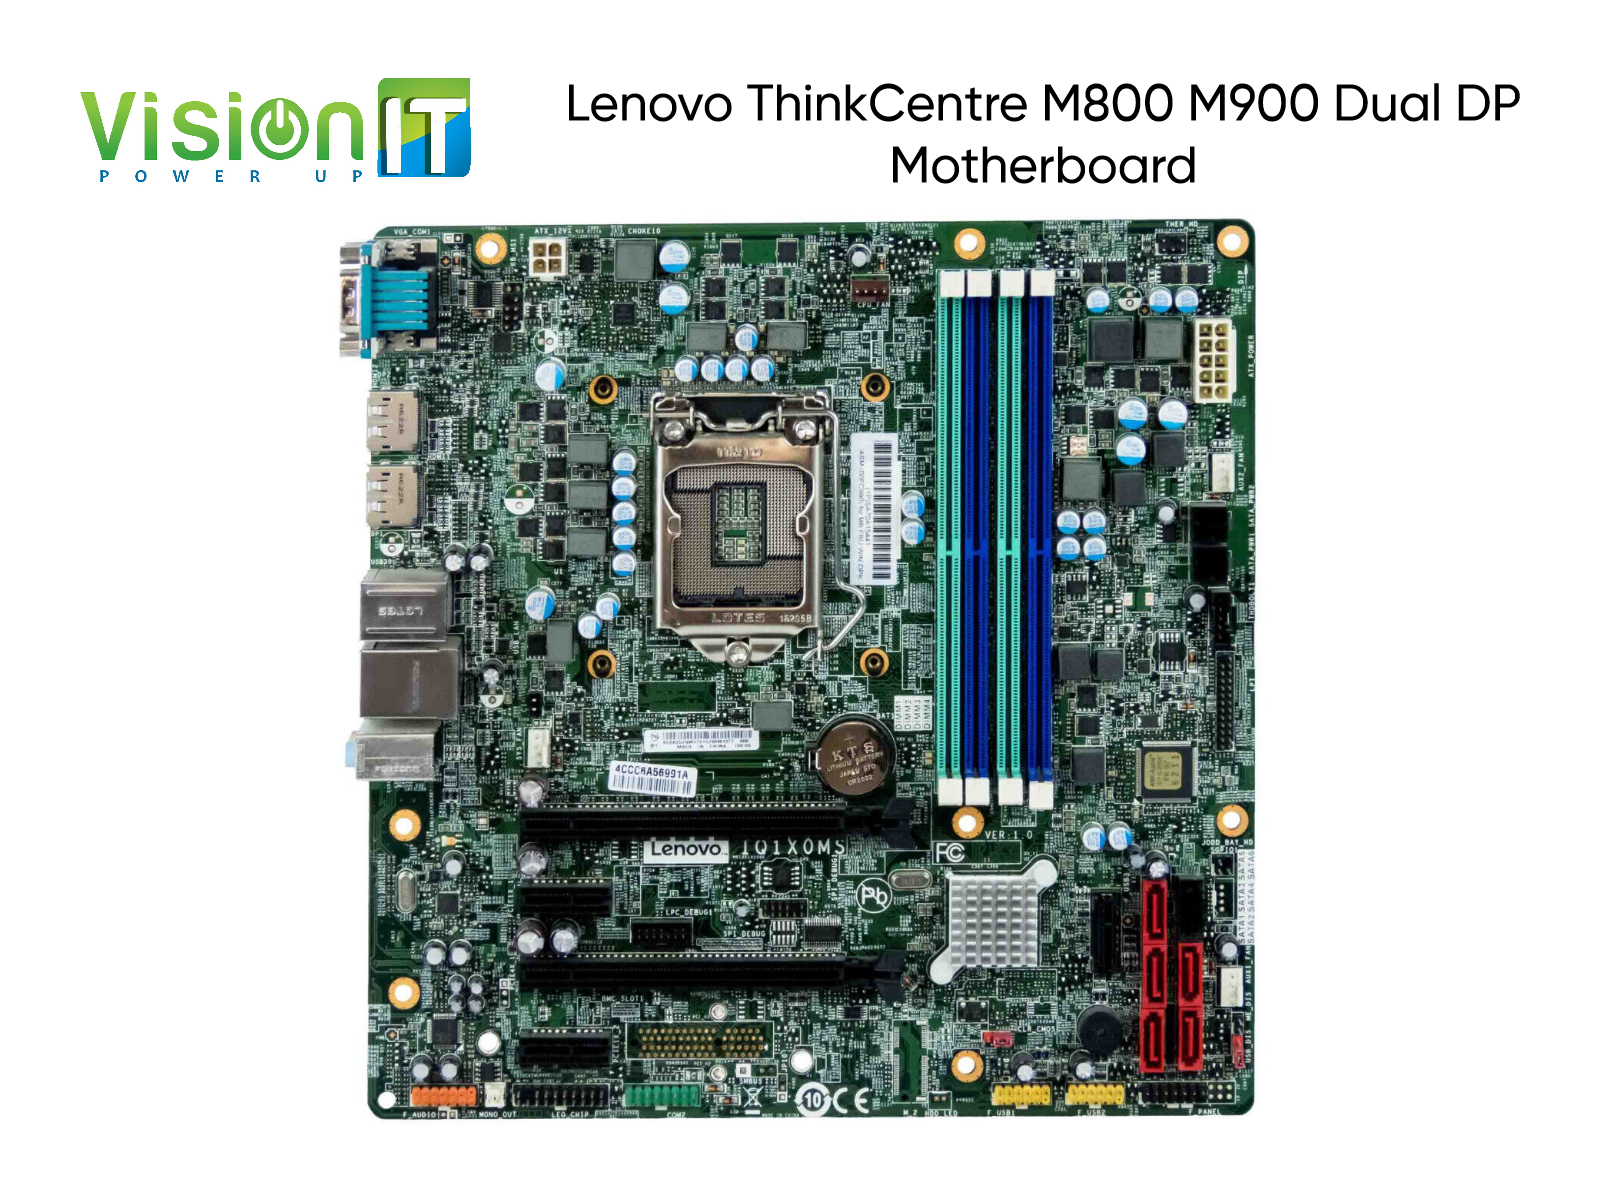 Lenovo ThinkCentre M800 M900 Dual DP Motherboard